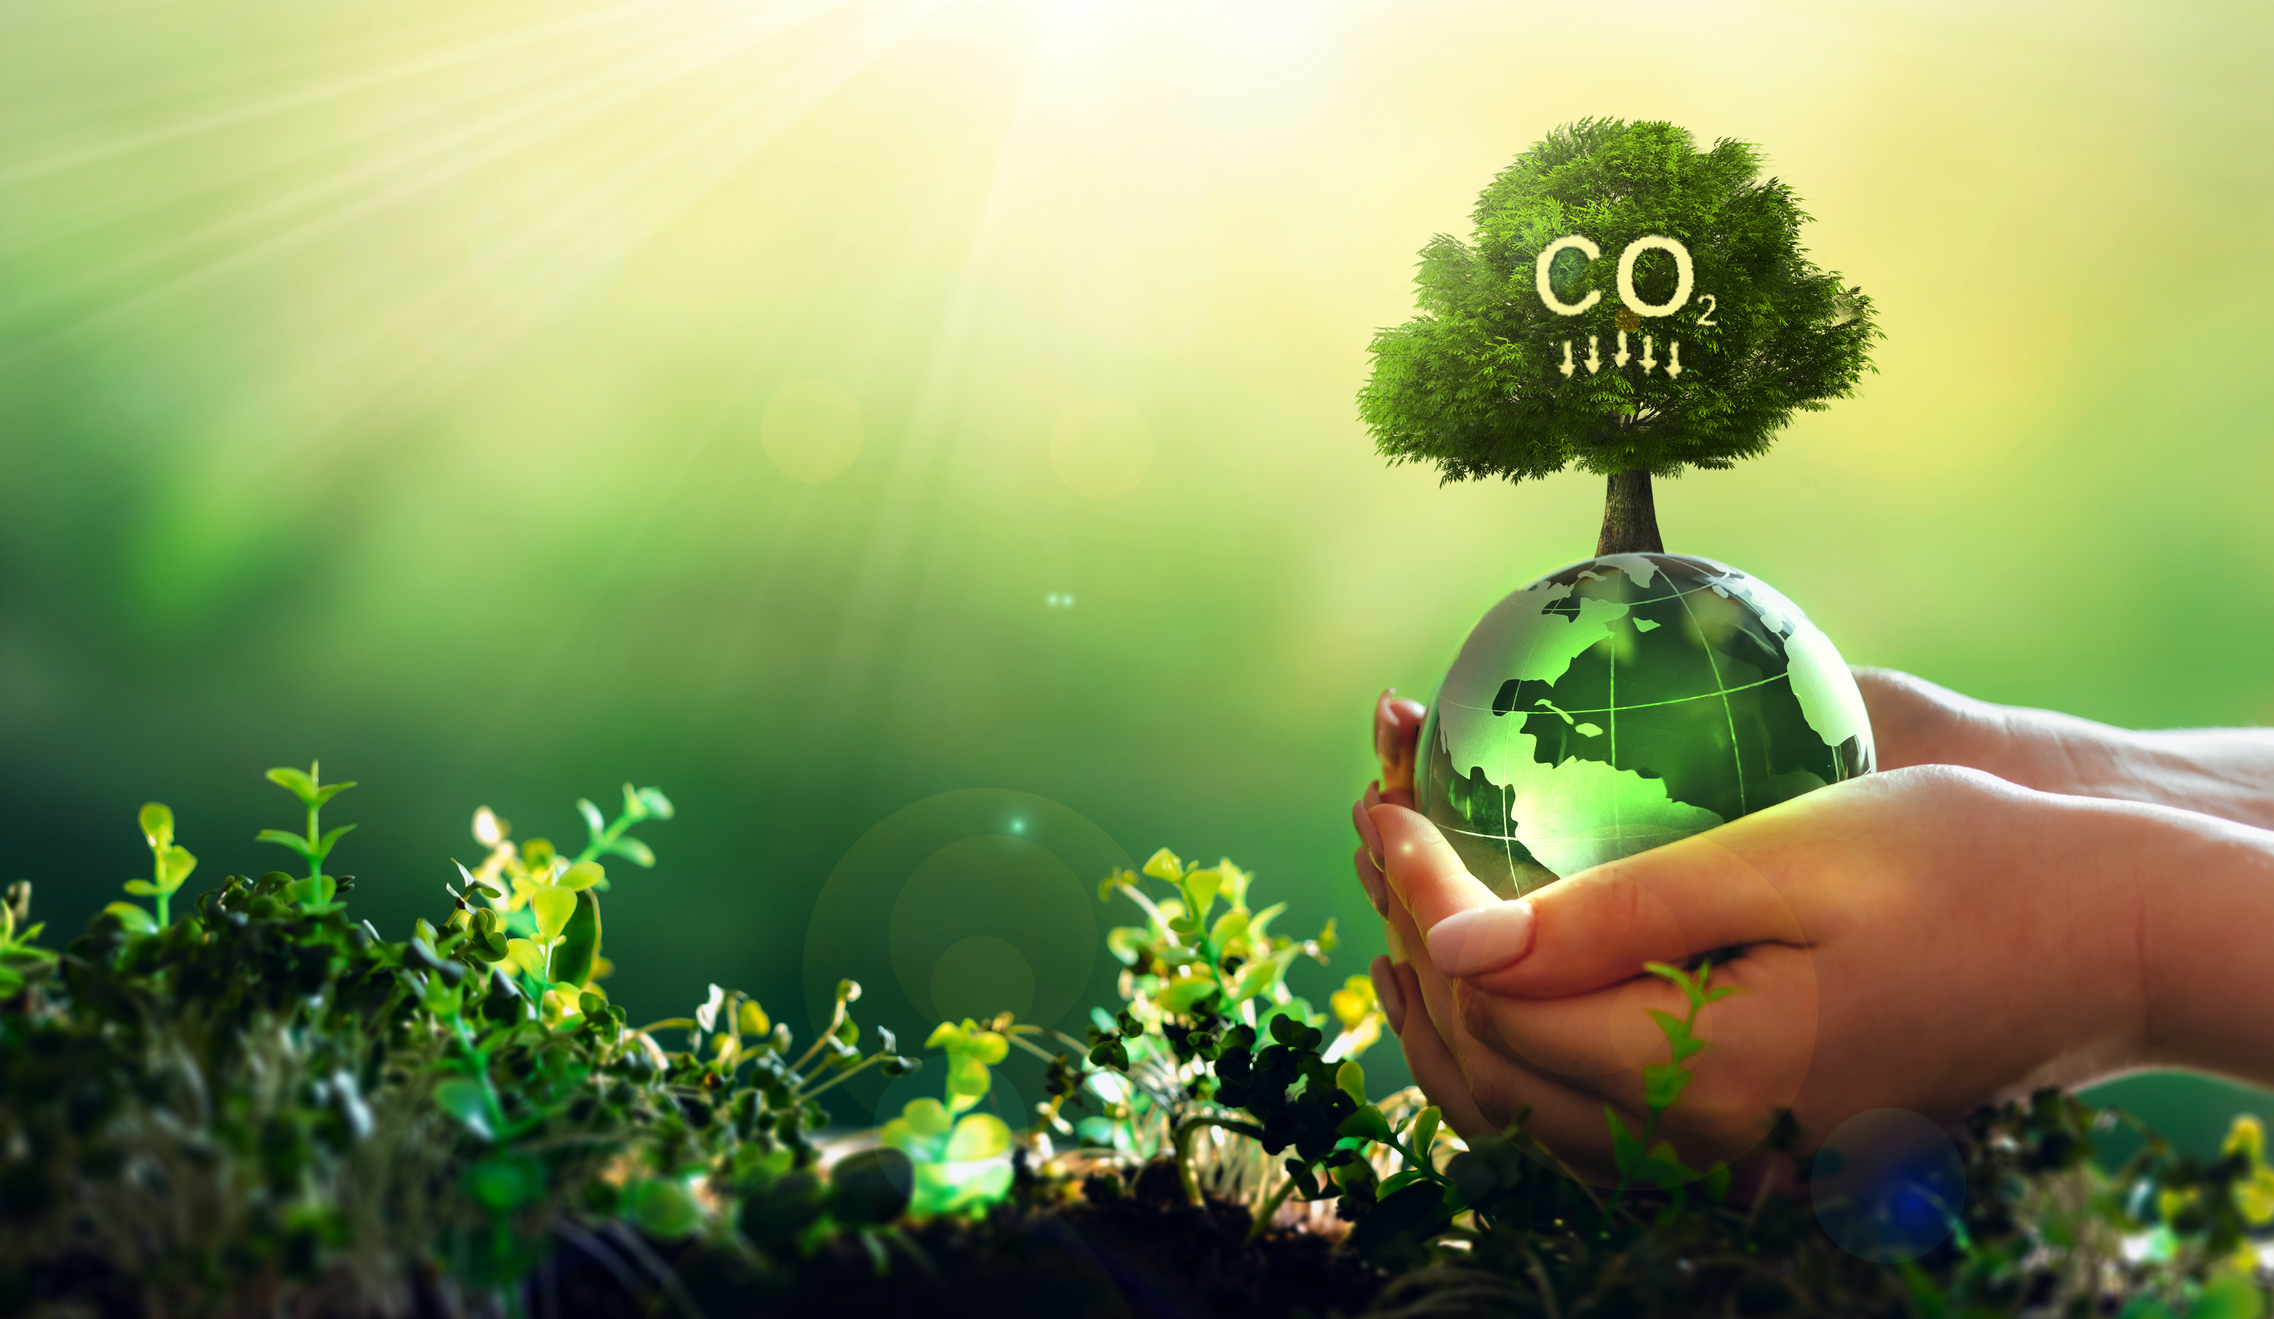 Inc-Query’s Commitment to Carbon Neutrality